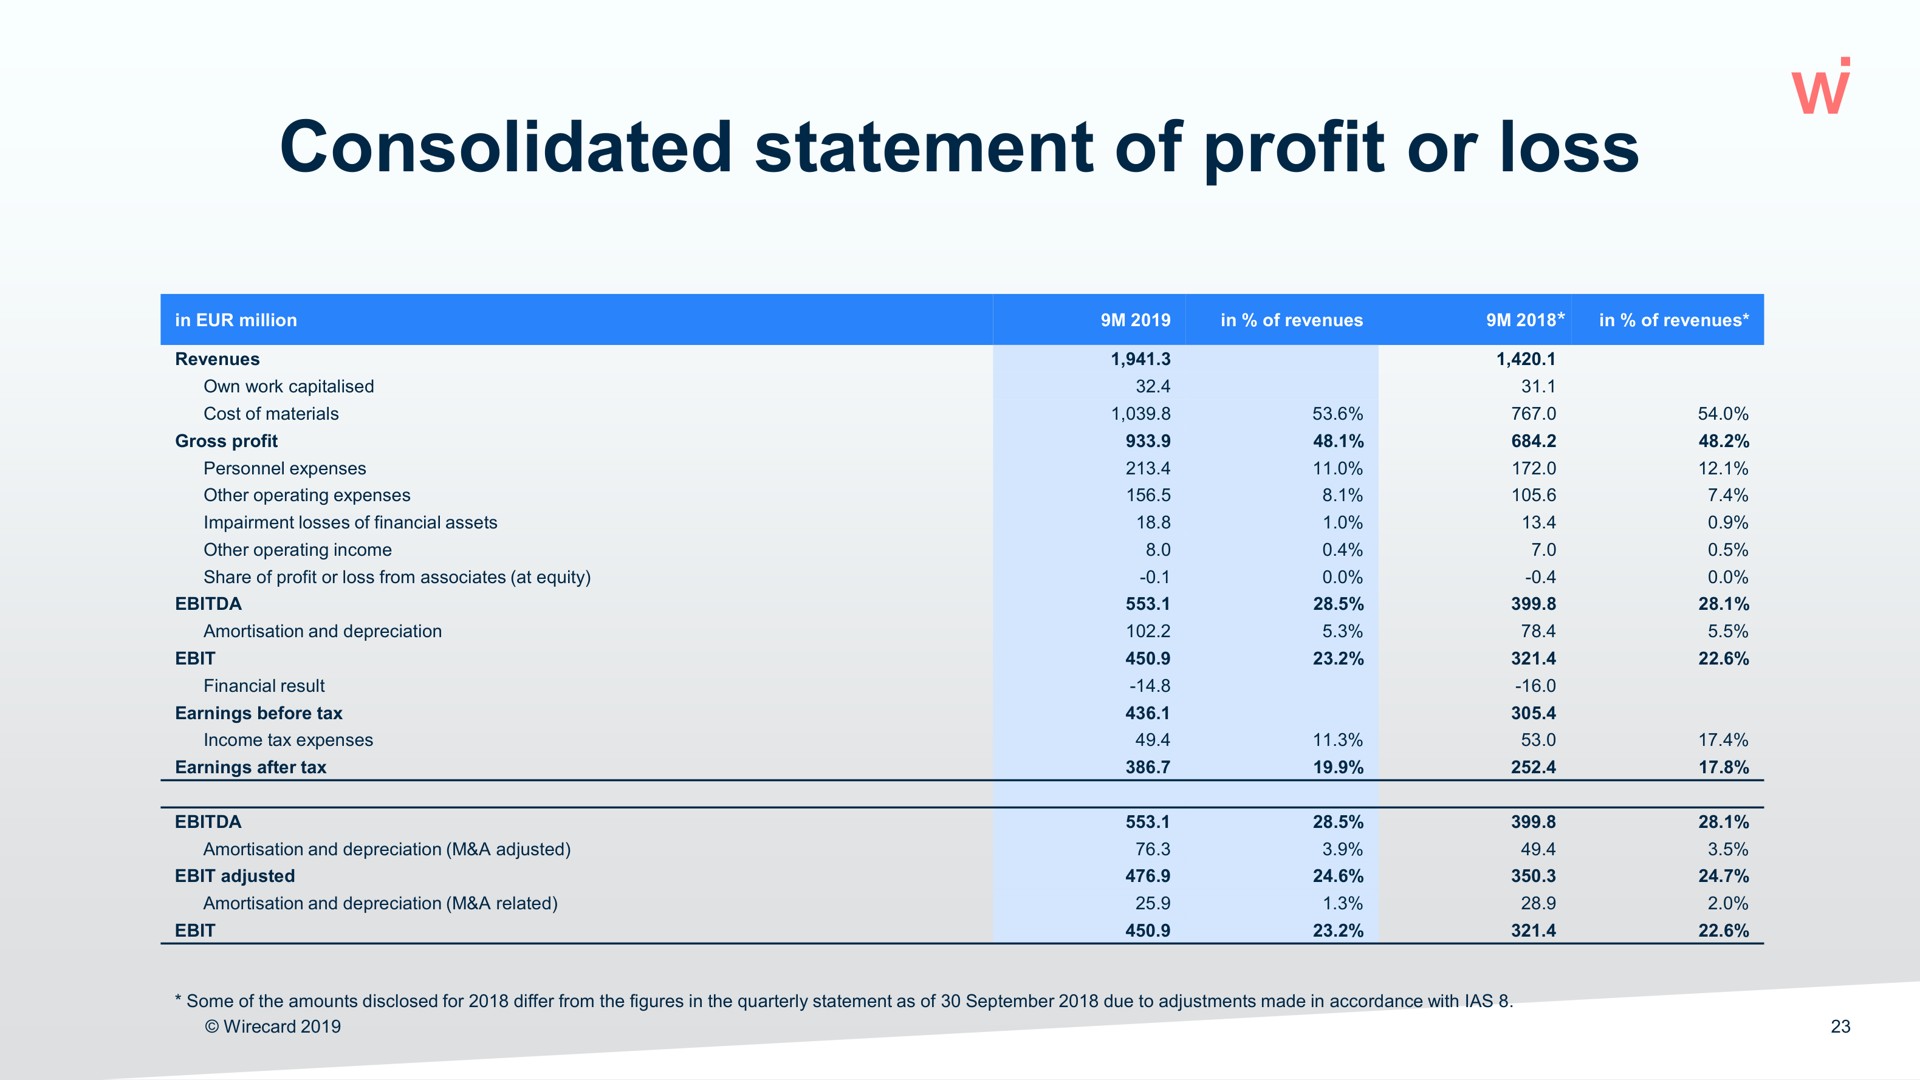 consolidated statement of profit or loss | Wirecard